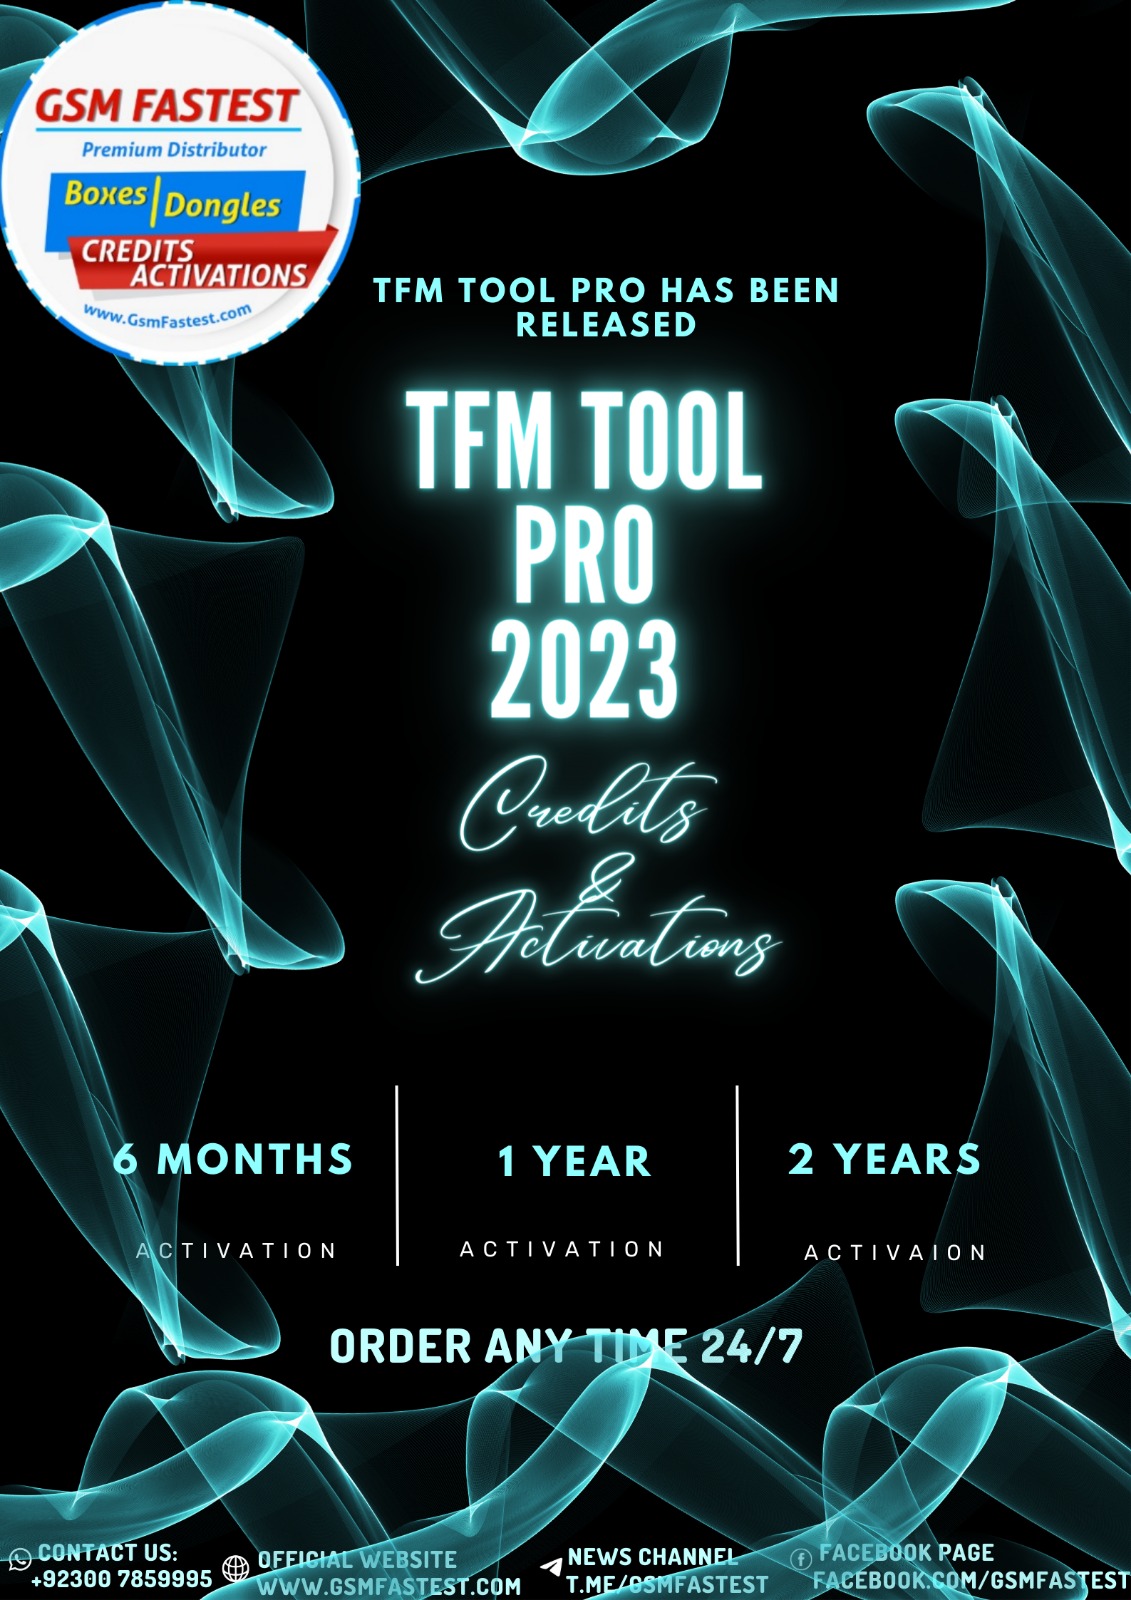 TFM TOOL PRO 2 Year Activation